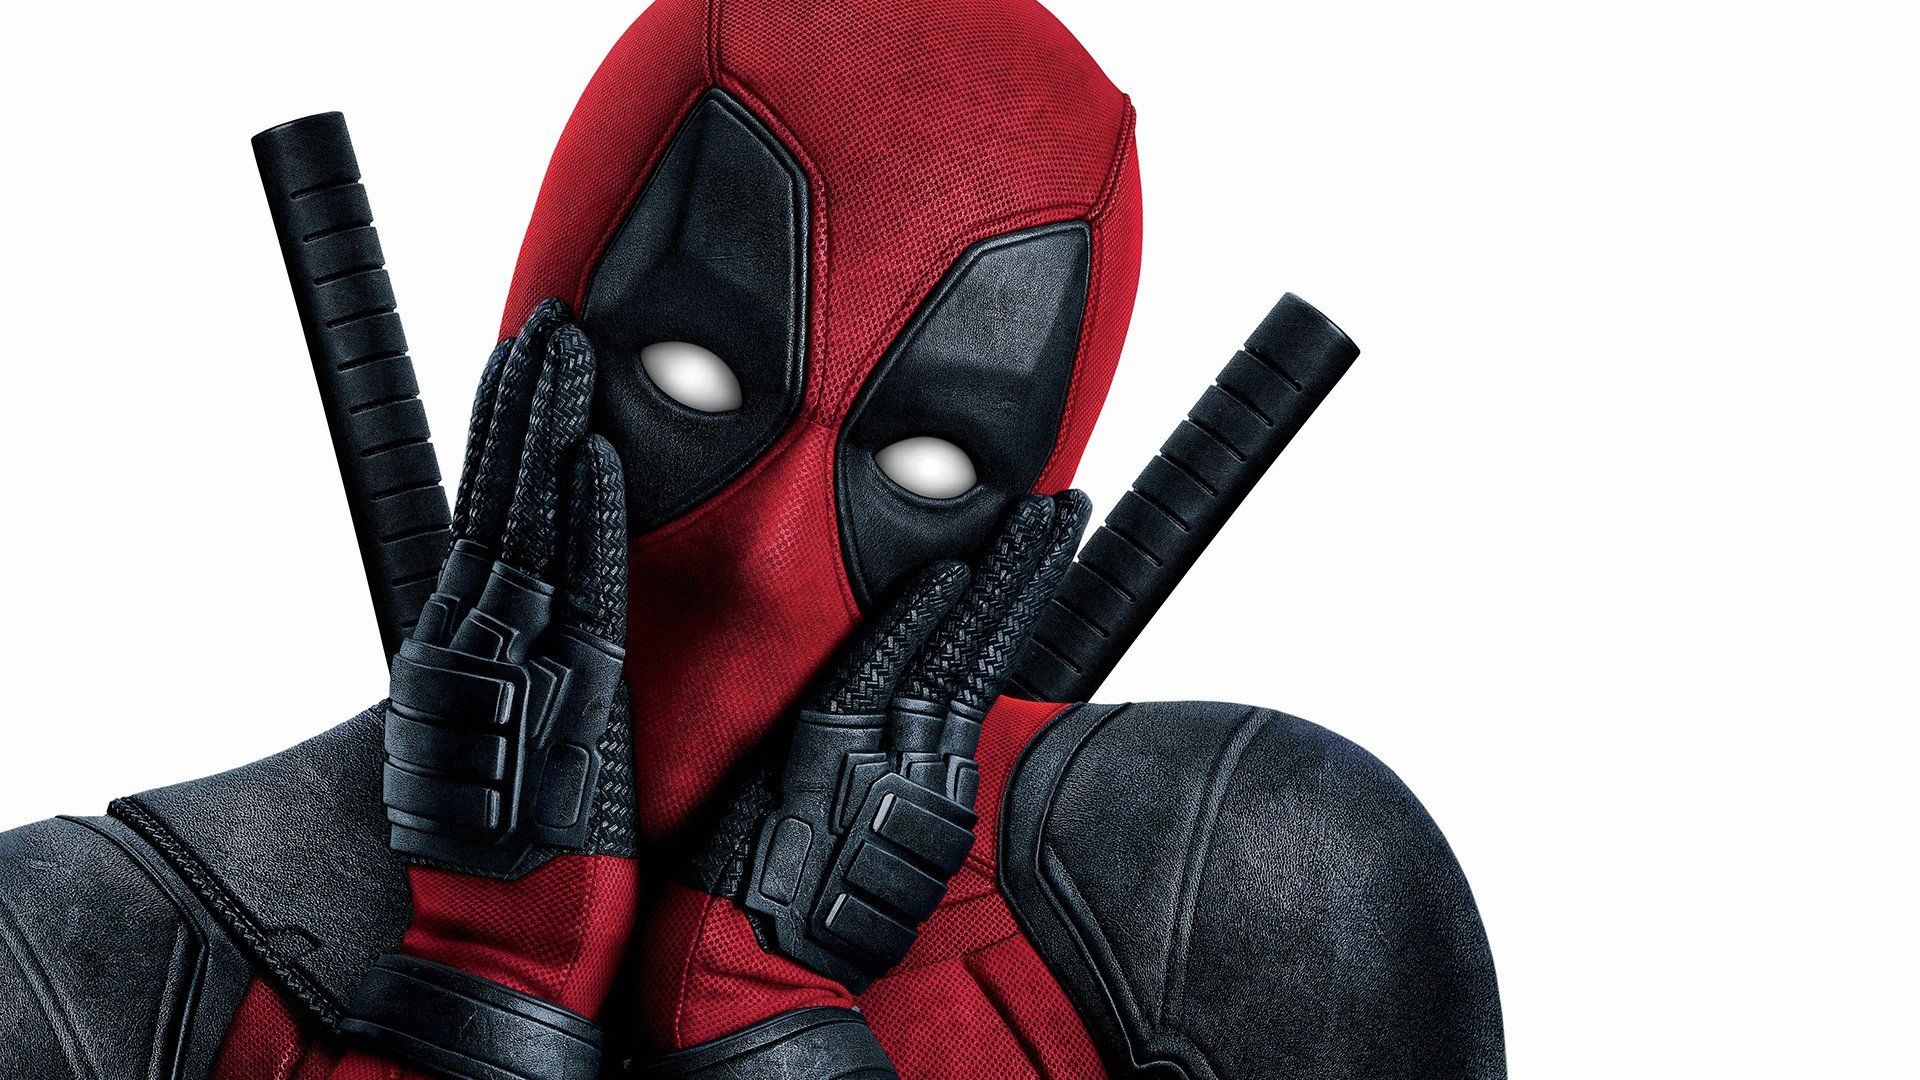 Deadpool Funny Wallpapers